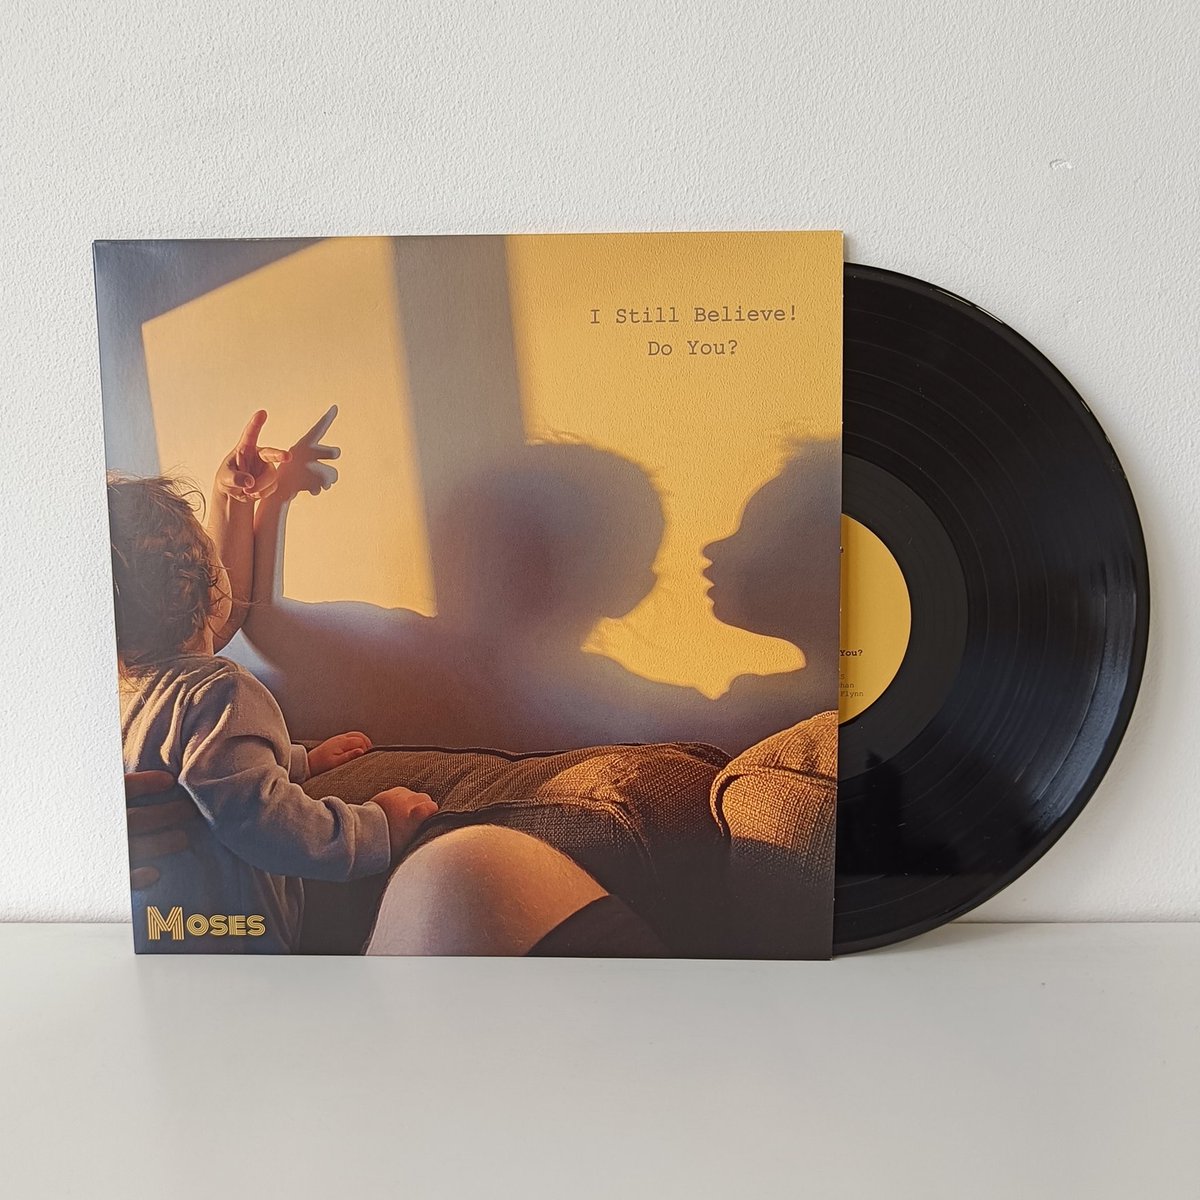 Happy New Year! We are fully back open now and looking forward to seeing what 2023 brings us, looking forward to working with our lovely regulars again & looking forward to discovering new music, just like this wonderful record we manufactured for @MosesOfficialUK / @rocklandstv